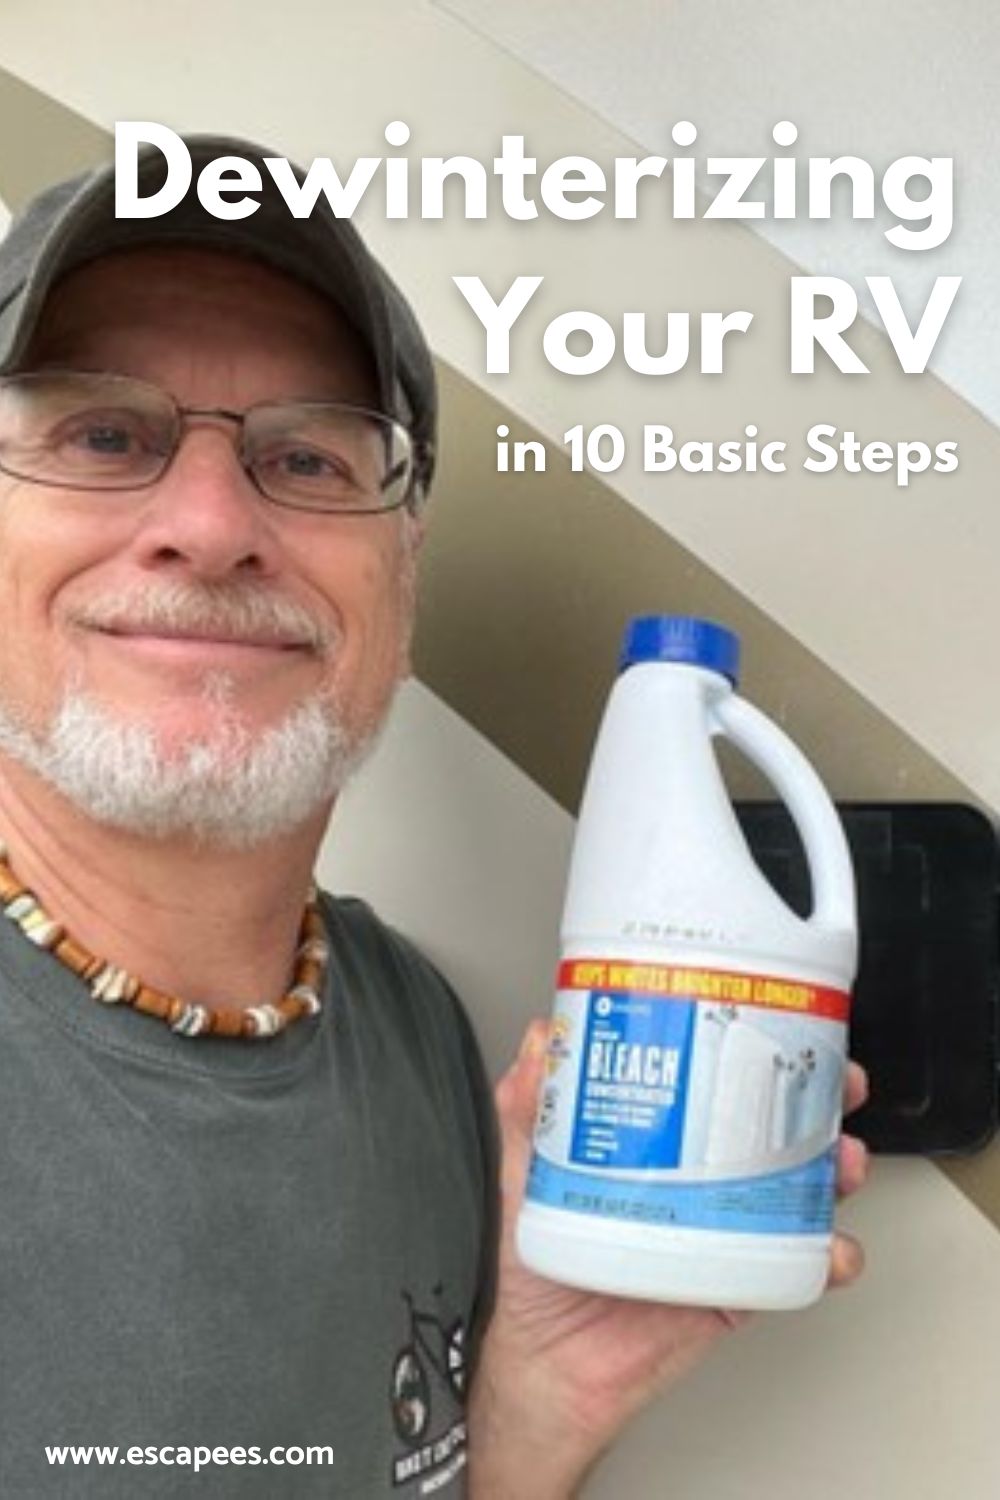 How To Dewinterize Your RV In 10 Basic Steps 117